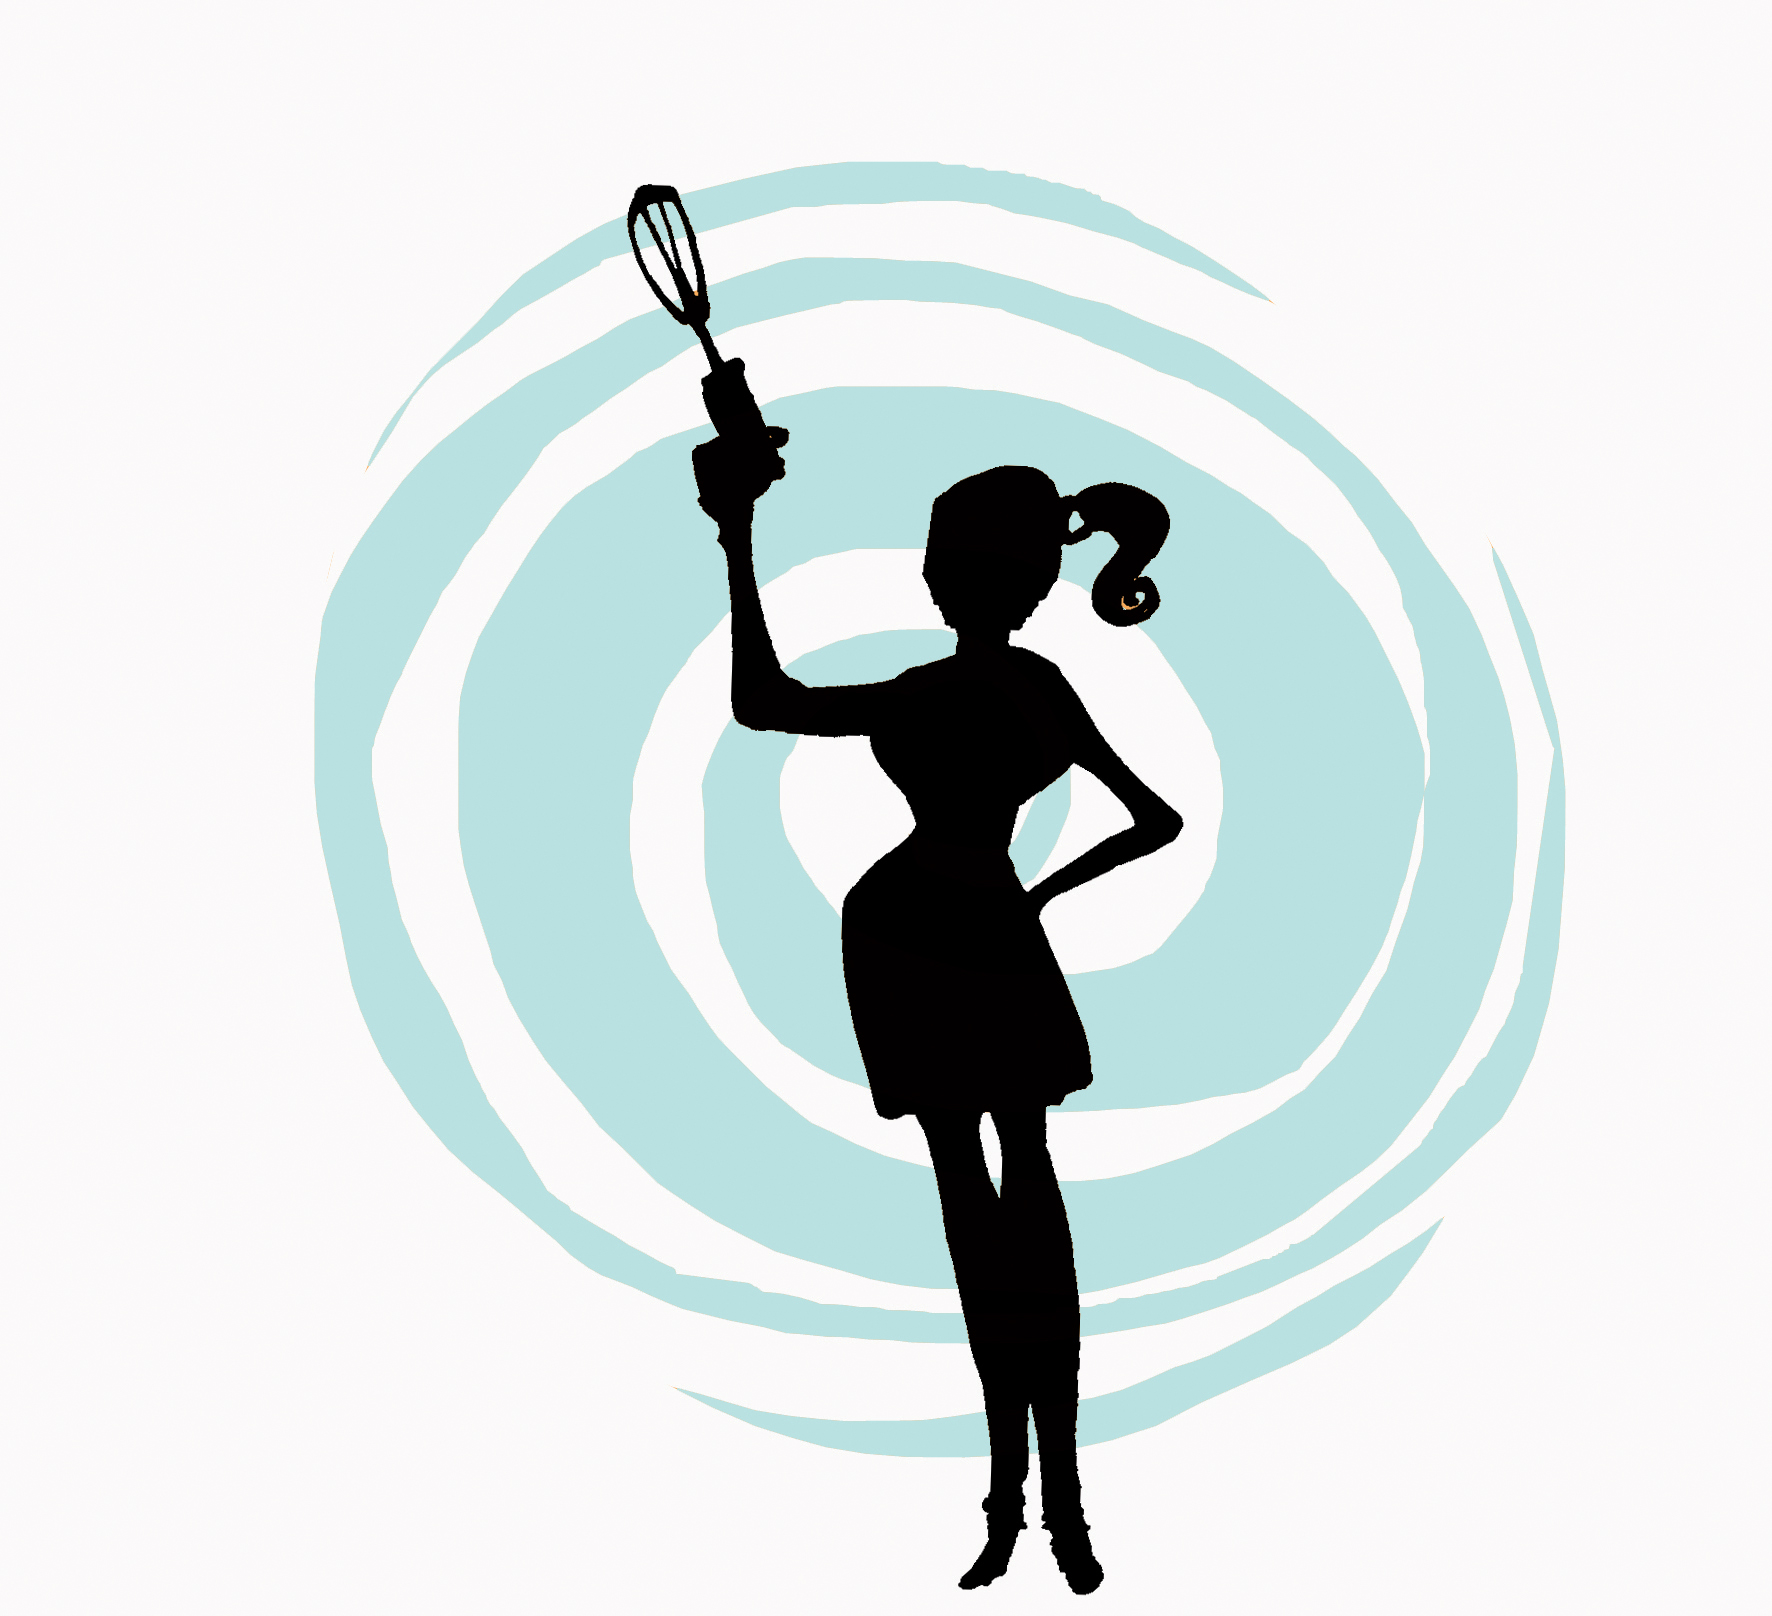 Woman Cooking Silhouette   Clipart Panda   Free Clipart Images